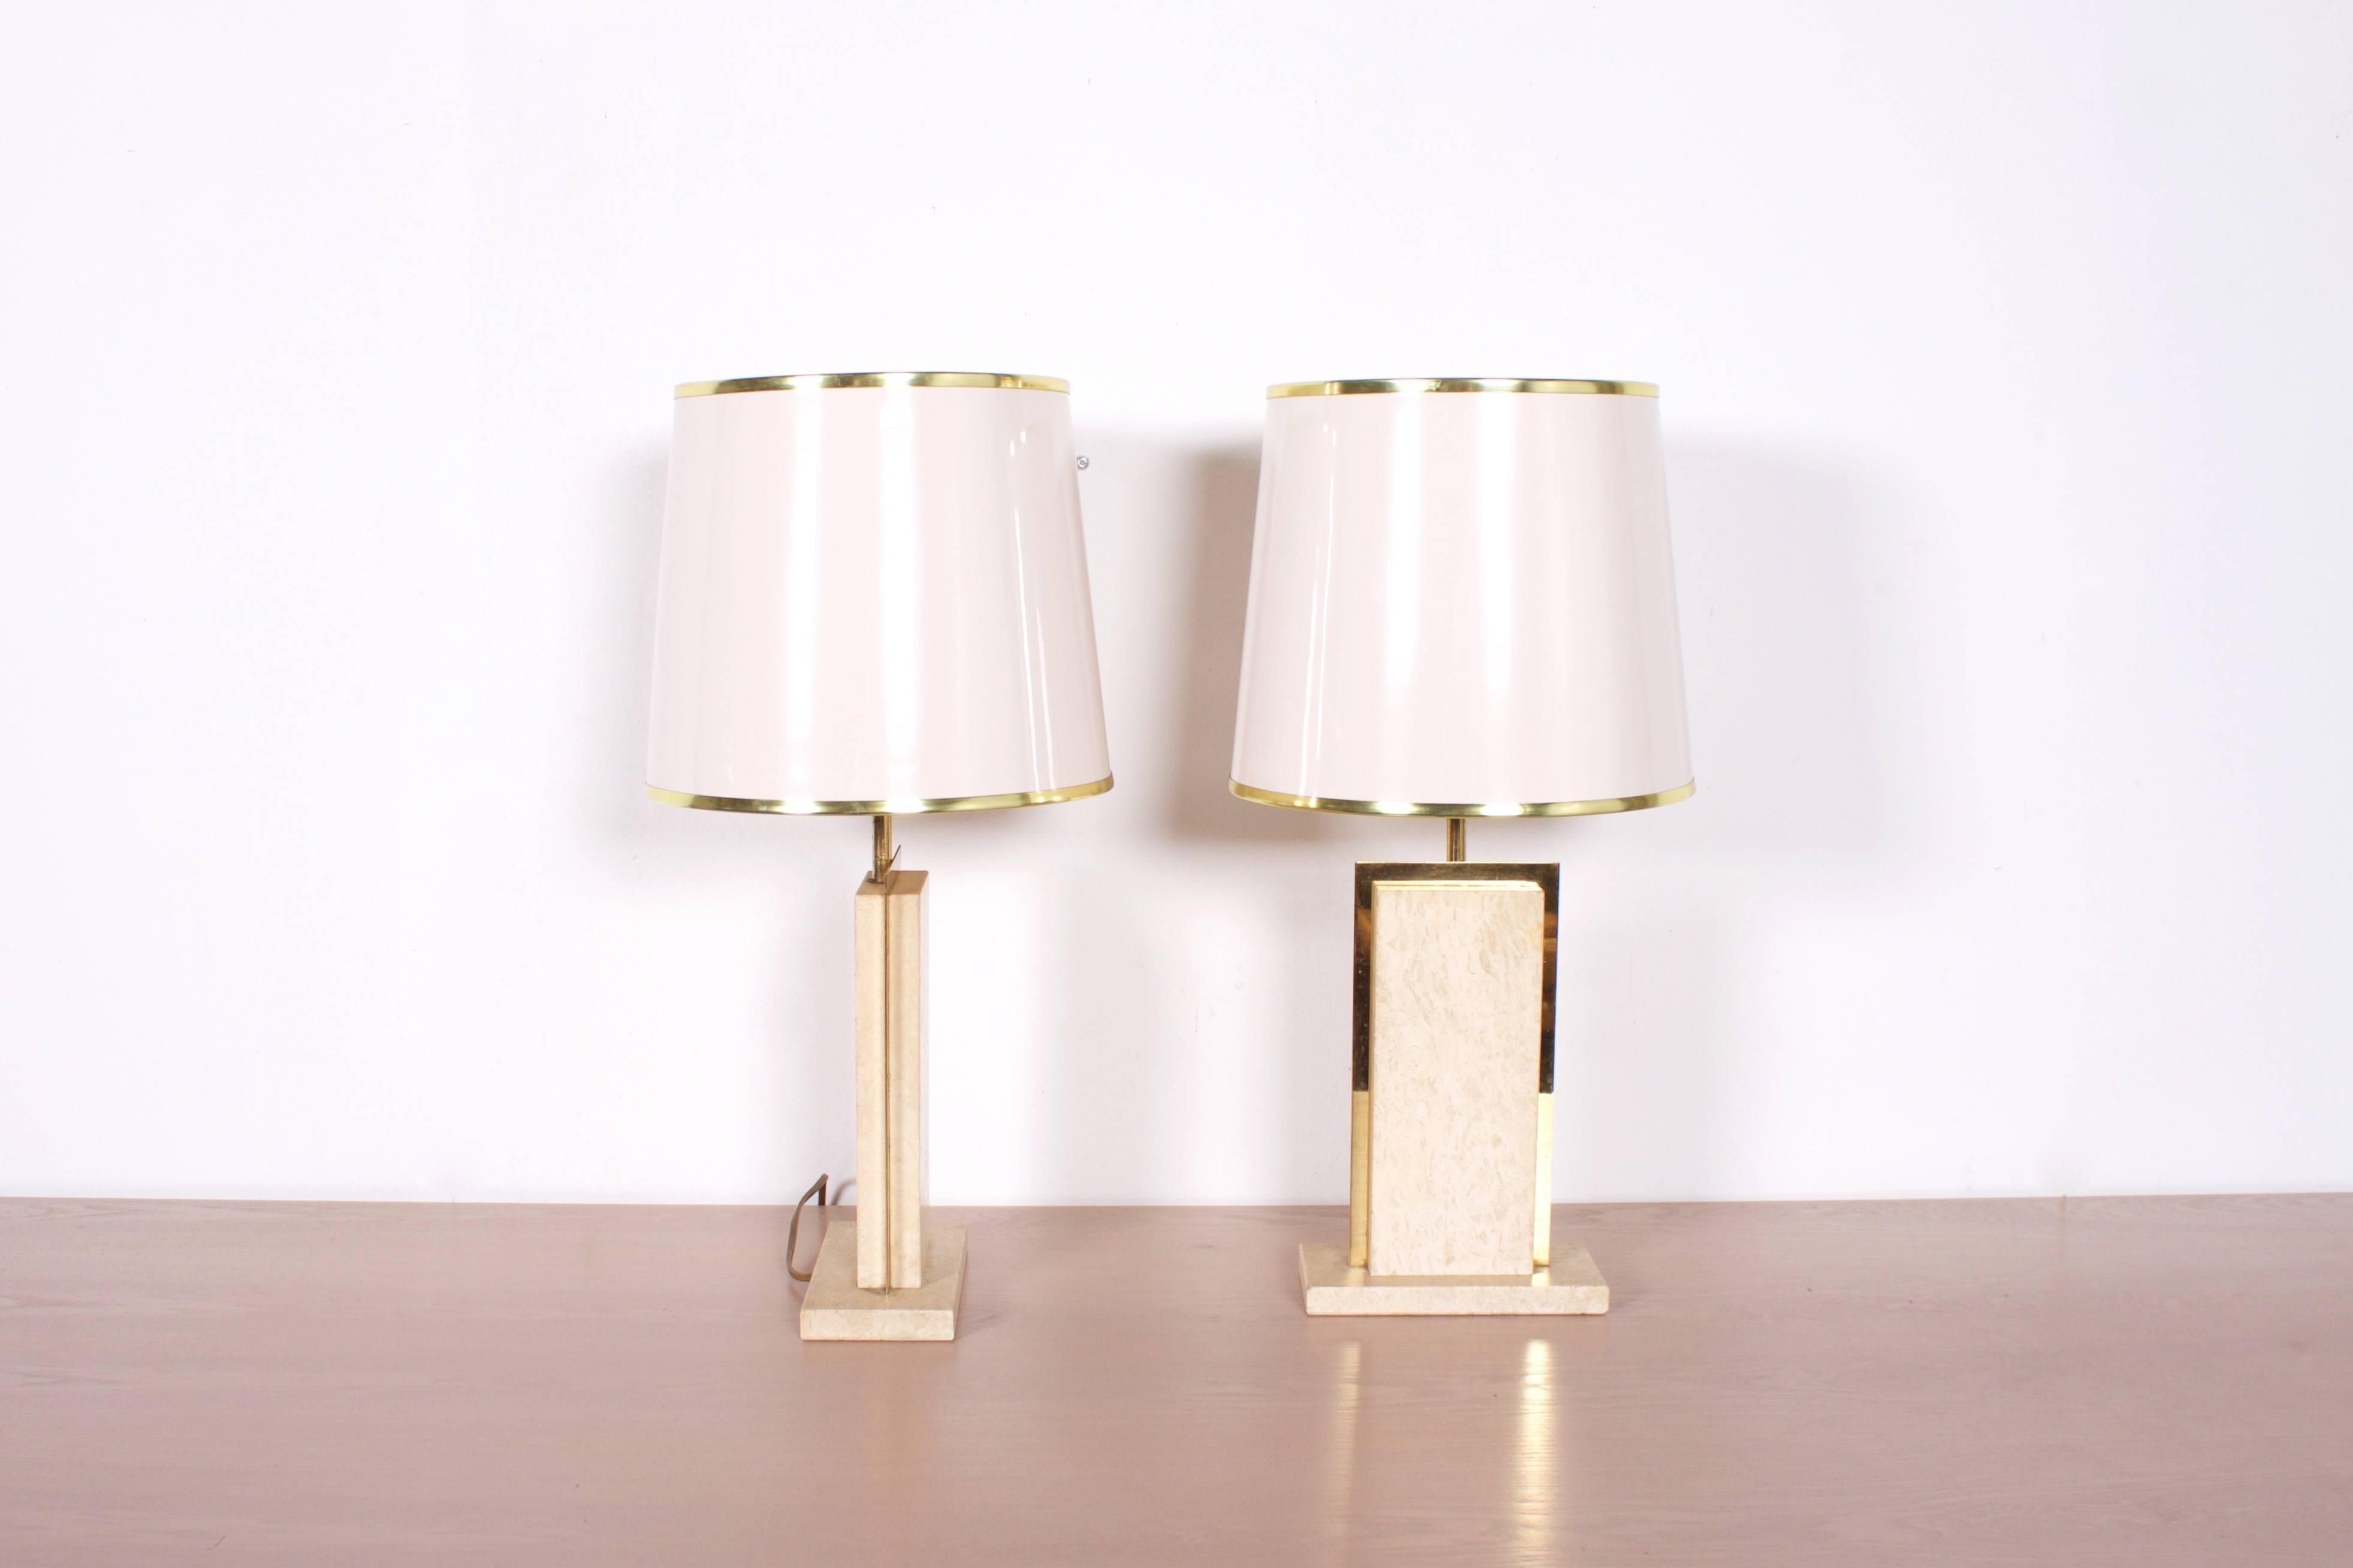 Two compact Willy Rizzo table lamps in good condition.

Manufacturer: Stone International.

Made of travertine with brass details.

White shade with a gold colored inside.

